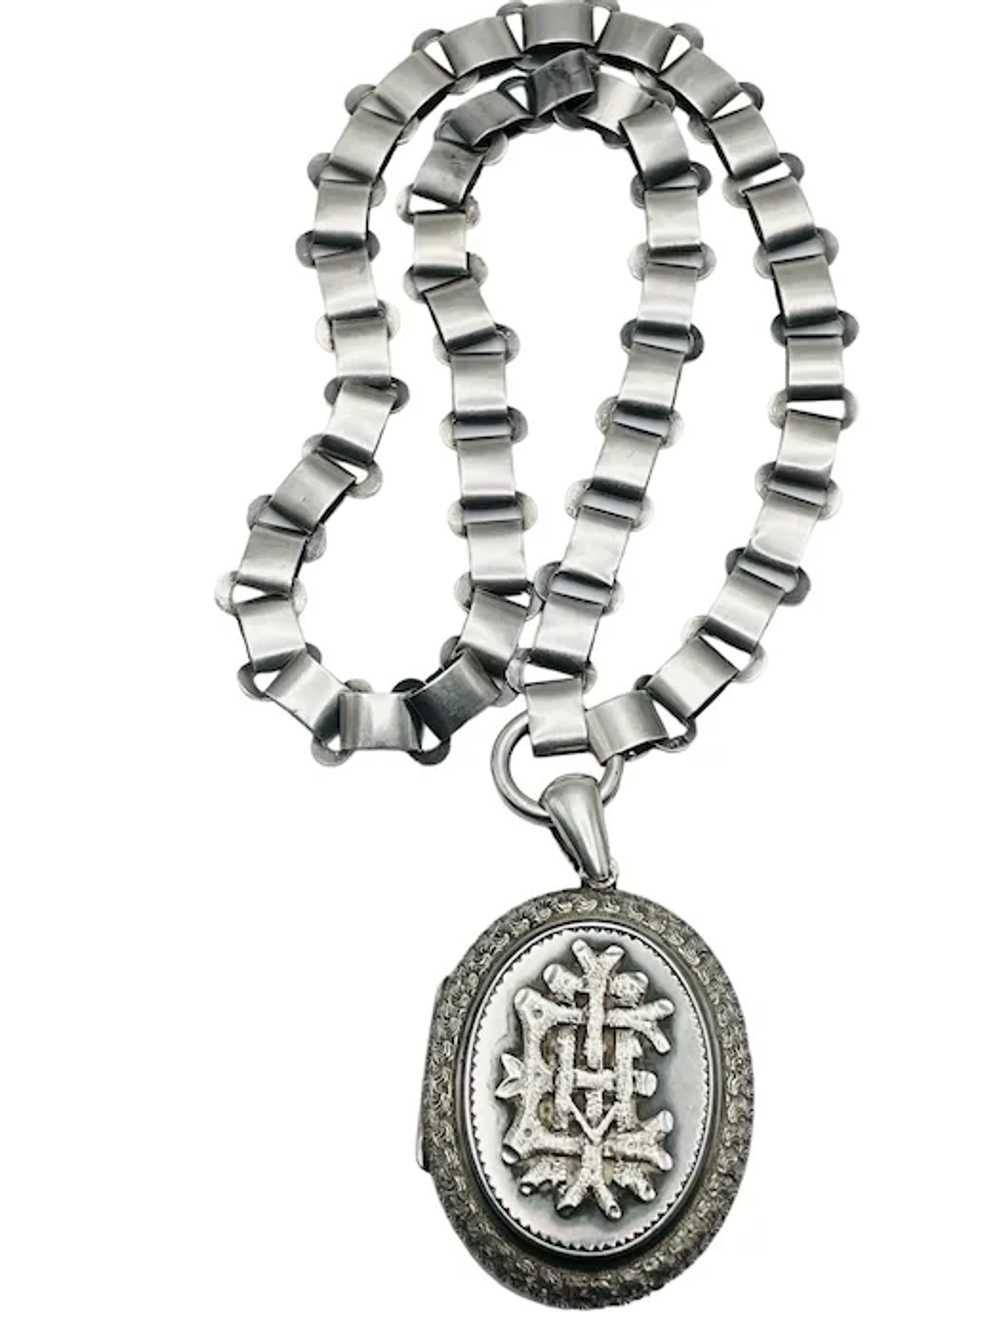 Antique Sterling Silver Locket Book Chain Necklace - image 4